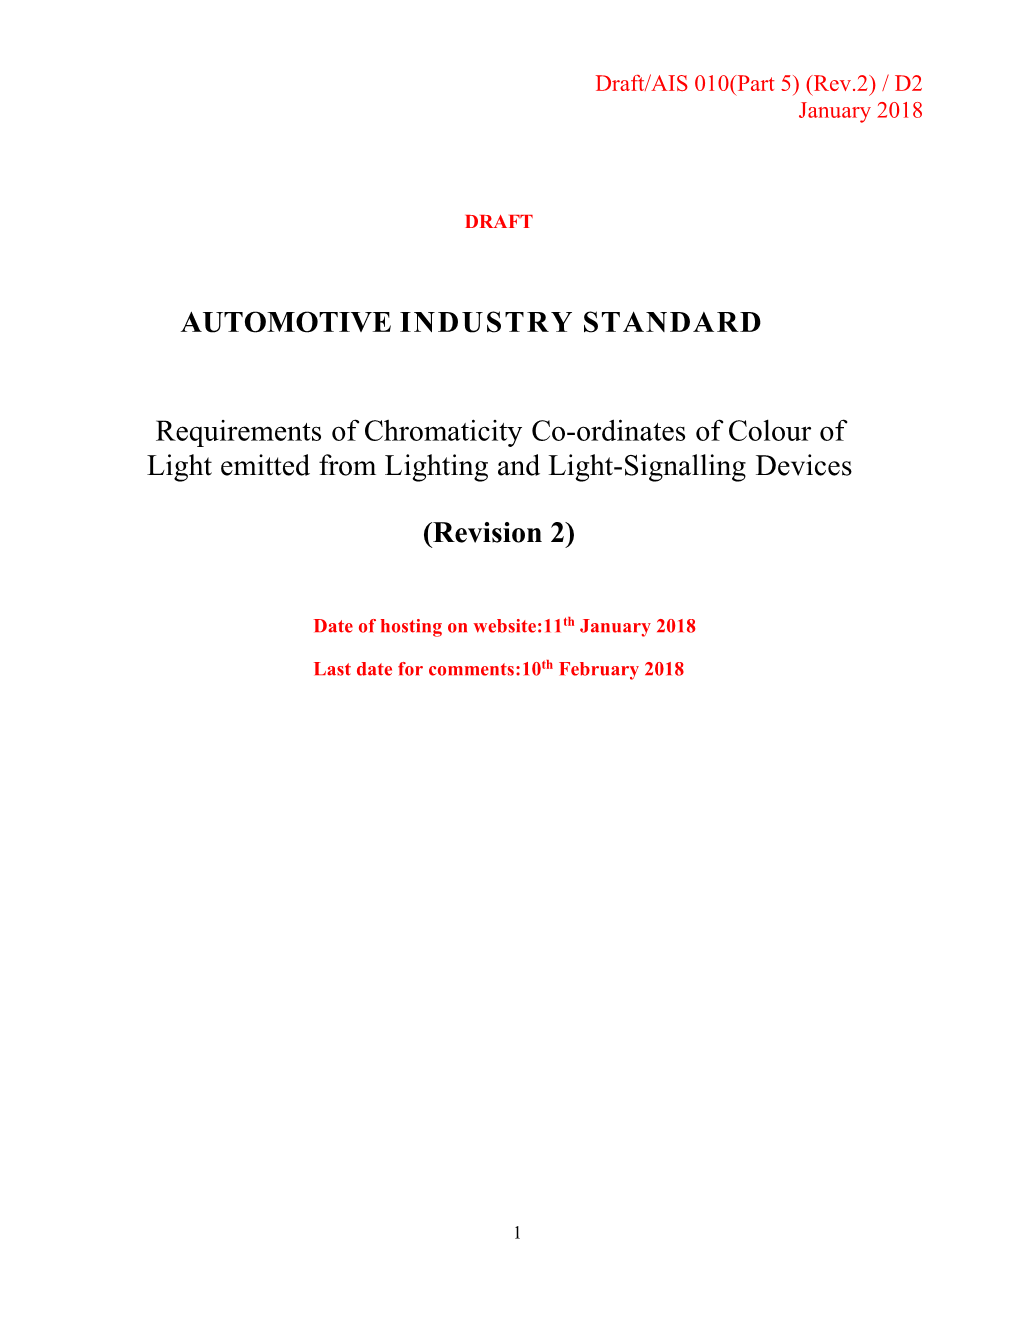 AUTOMOTIVE INDUSTRY STANDARD Requirements Of